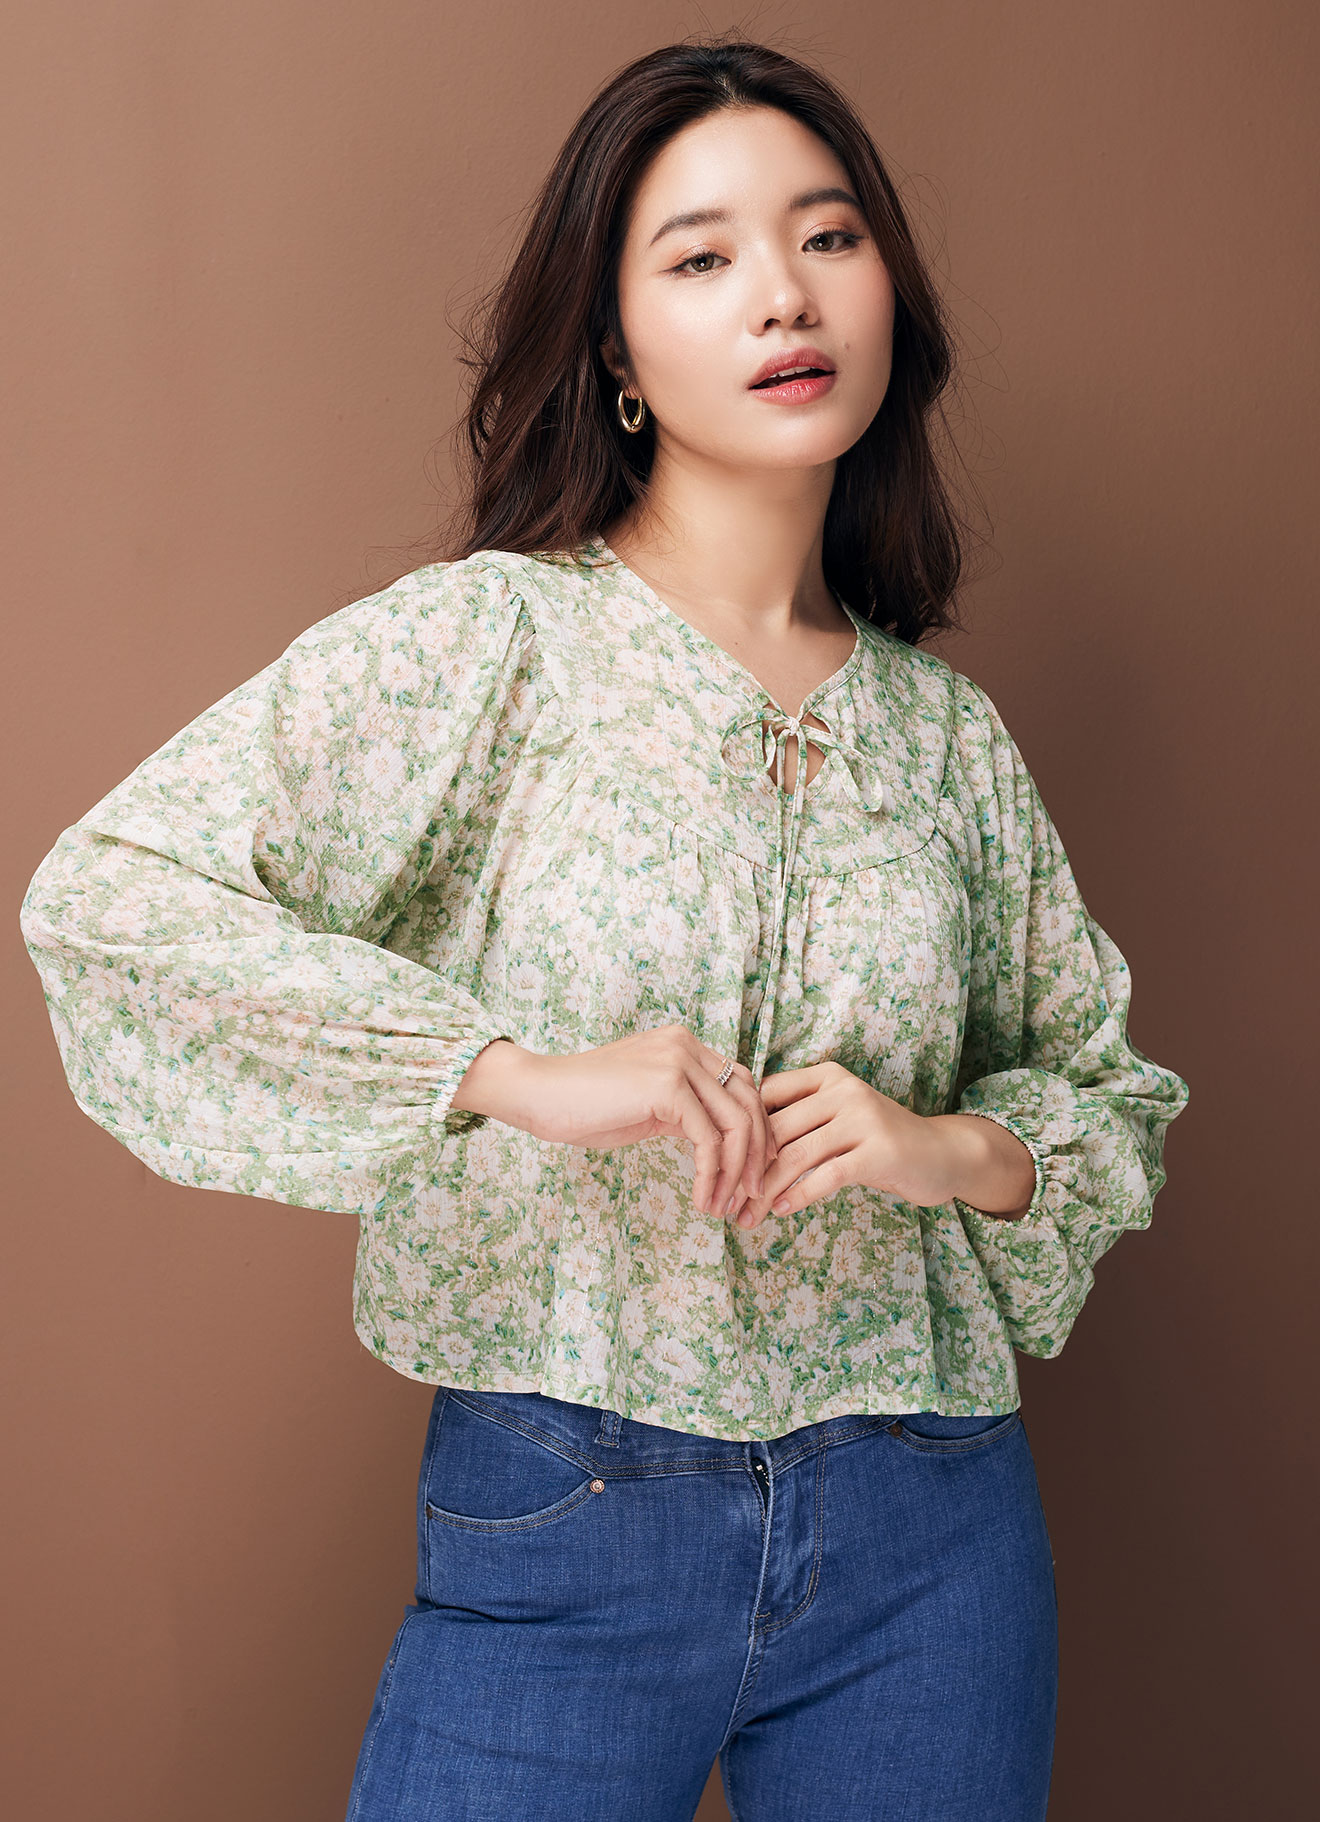 Zephyr-Green by Floral Printed Blouse